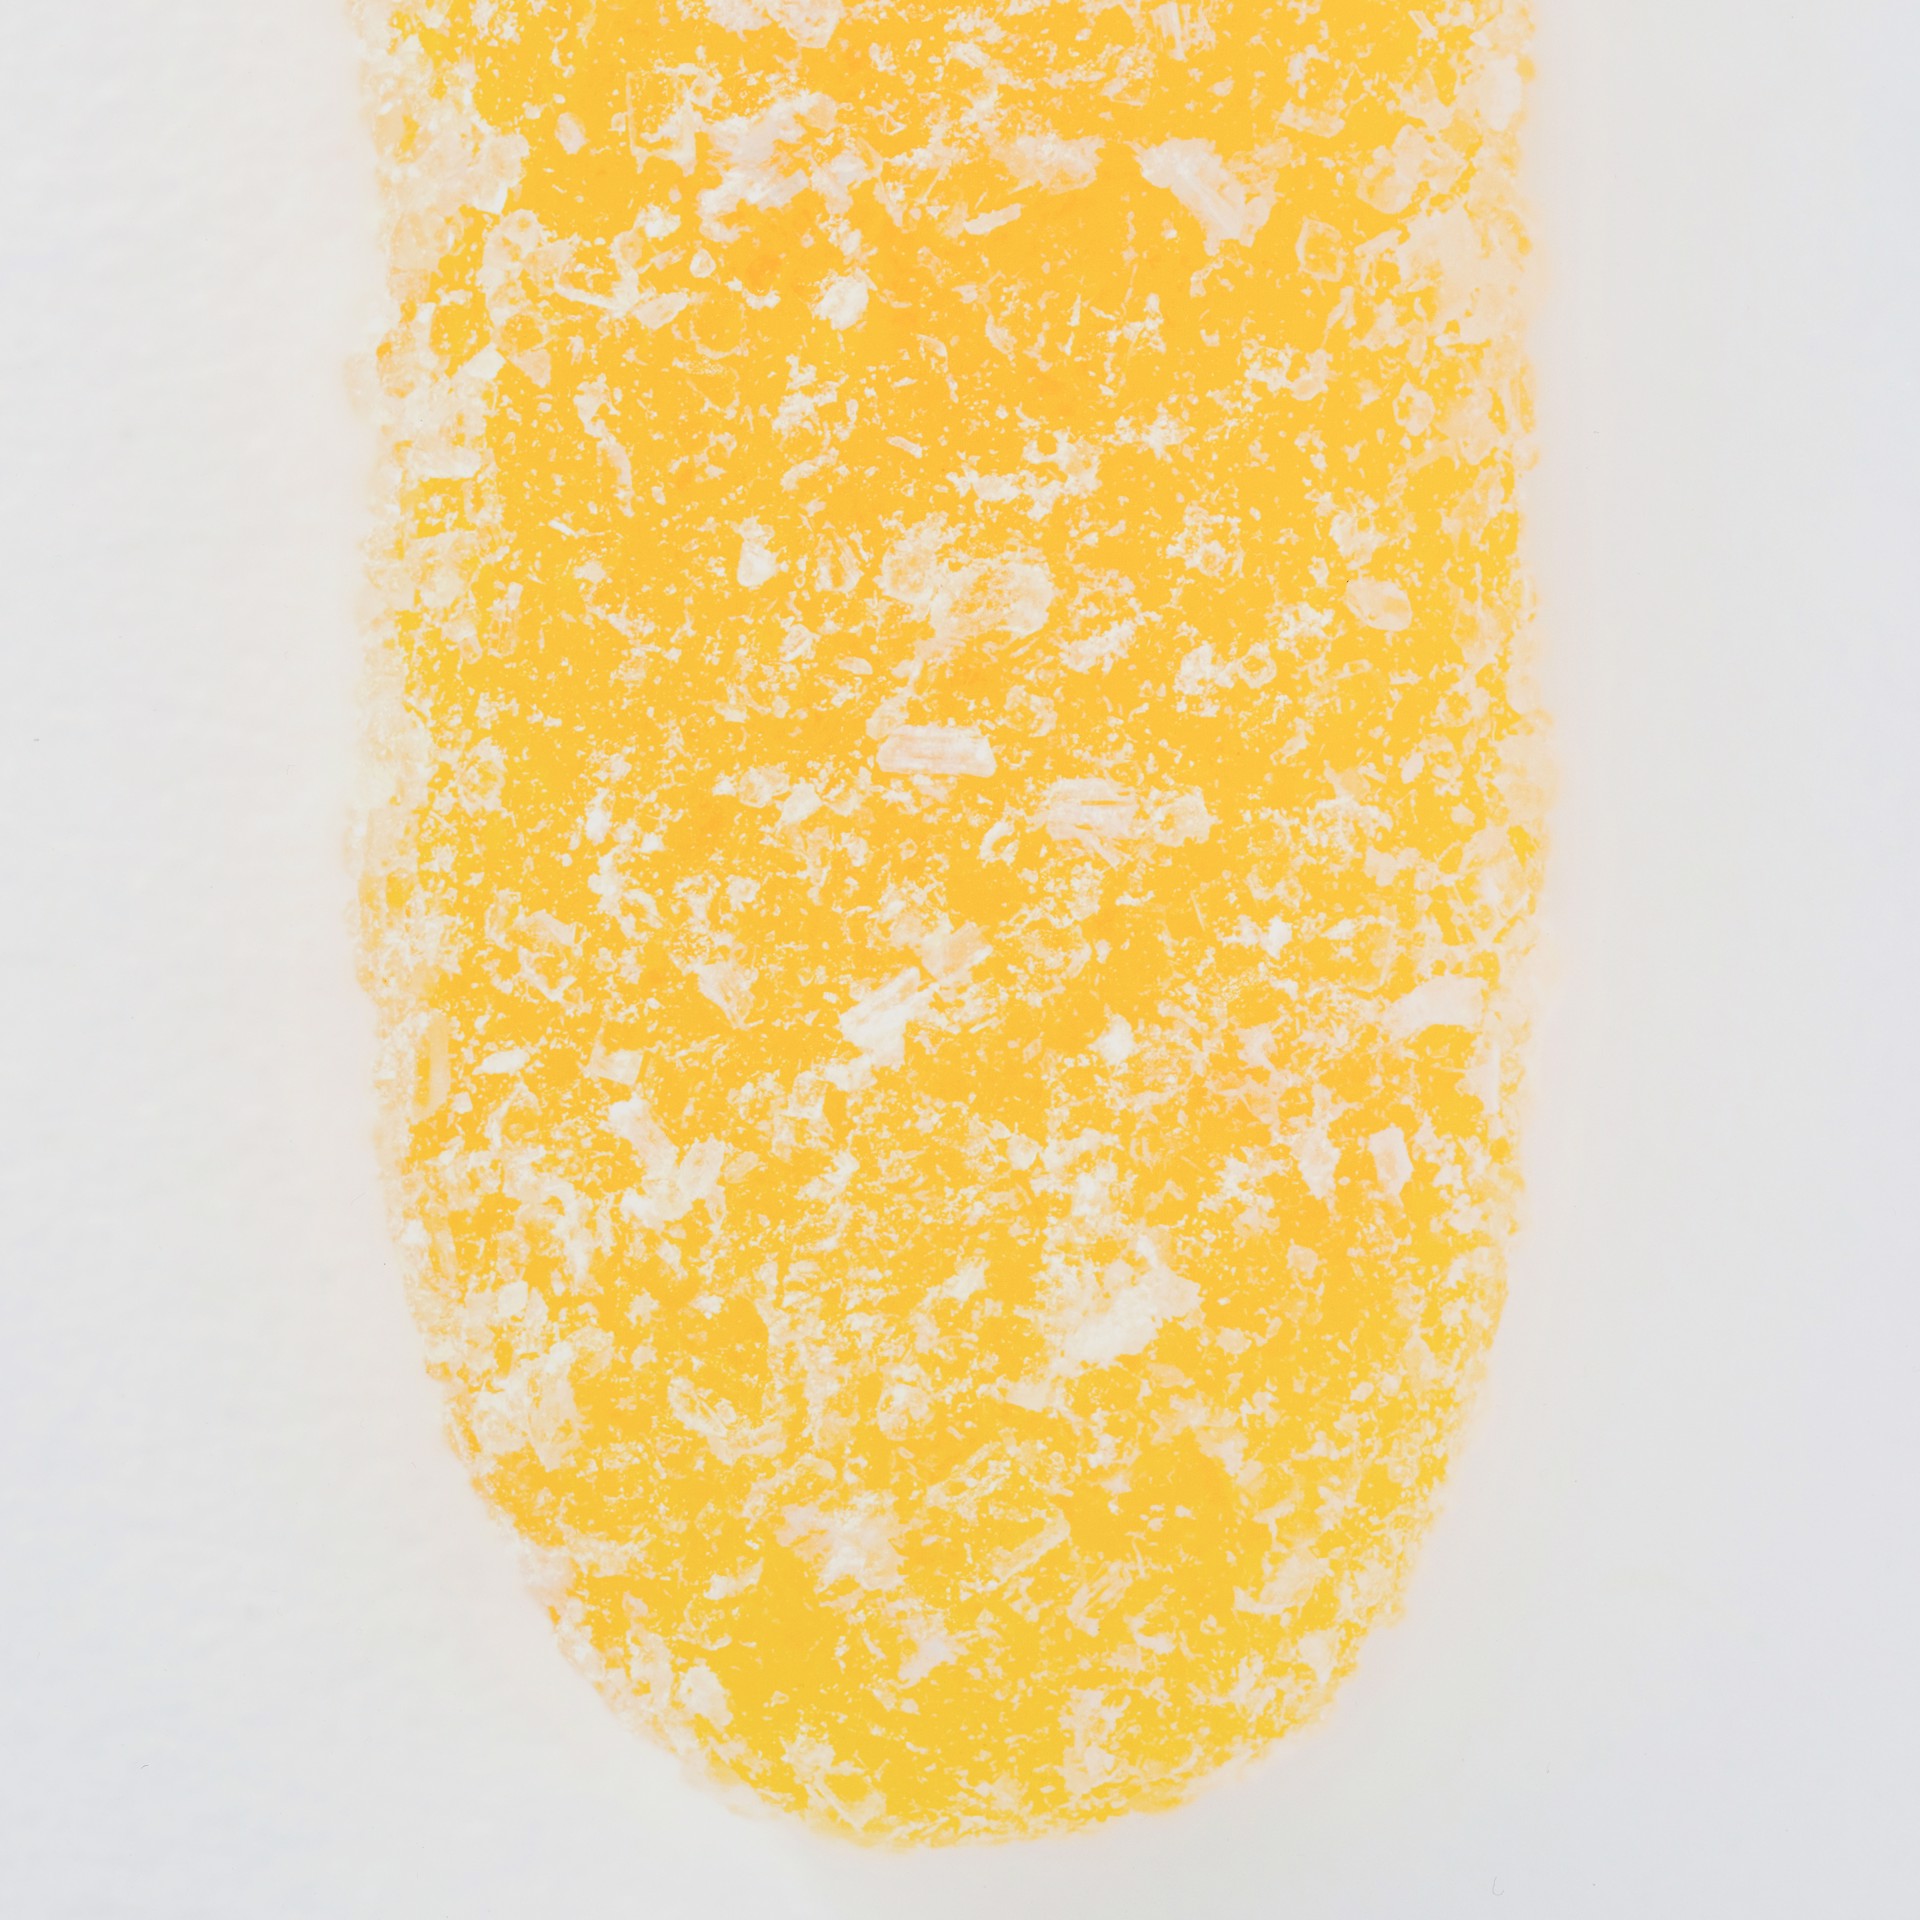 Sour Key - Yellow by Peter Andrew Lusztyk / Refined Sugar